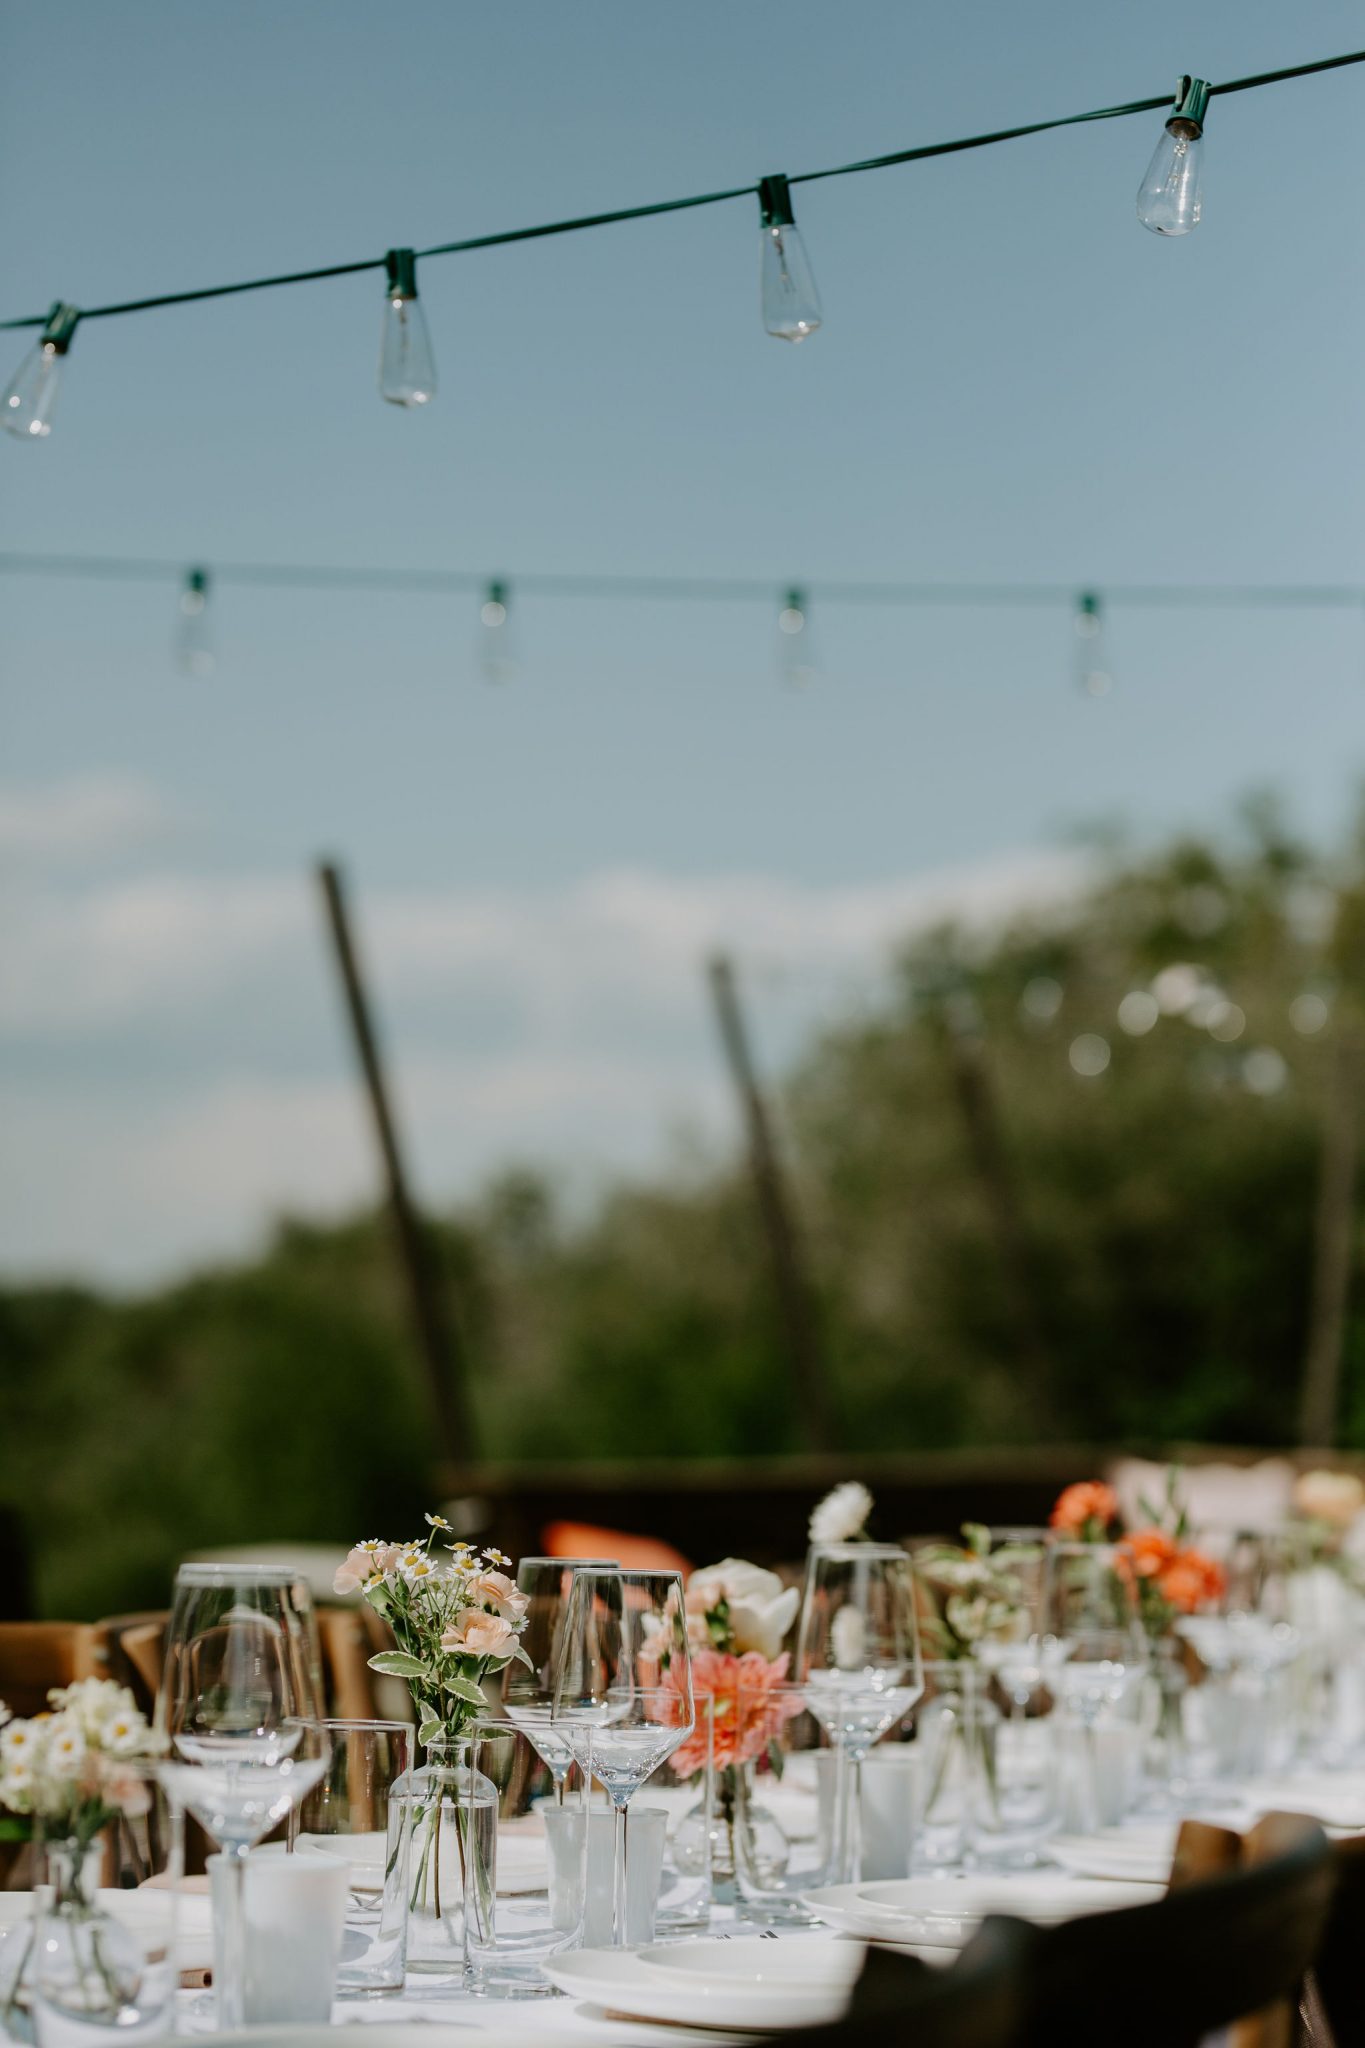 Patio Dinner Party at The Glenmore Sailing Club - Calgary Wedding featured on Bronte Bride